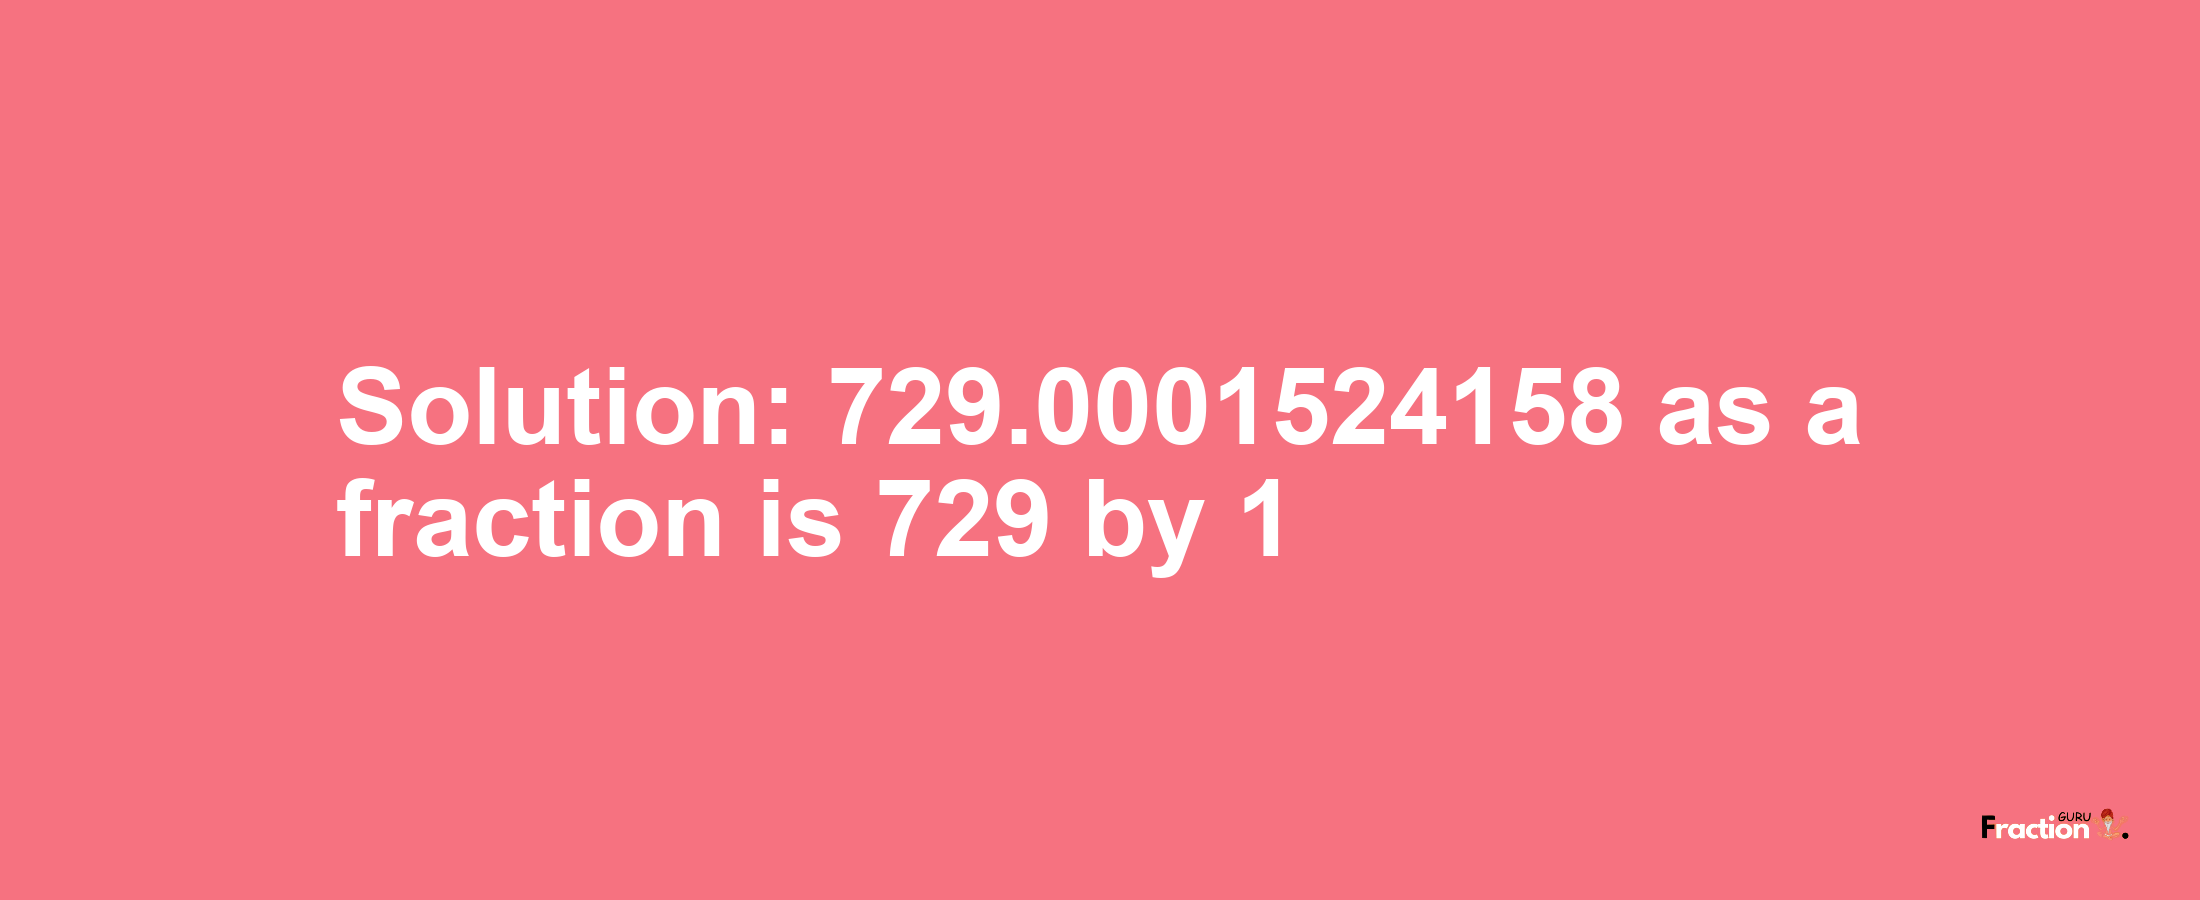 Solution:729.0001524158 as a fraction is 729/1